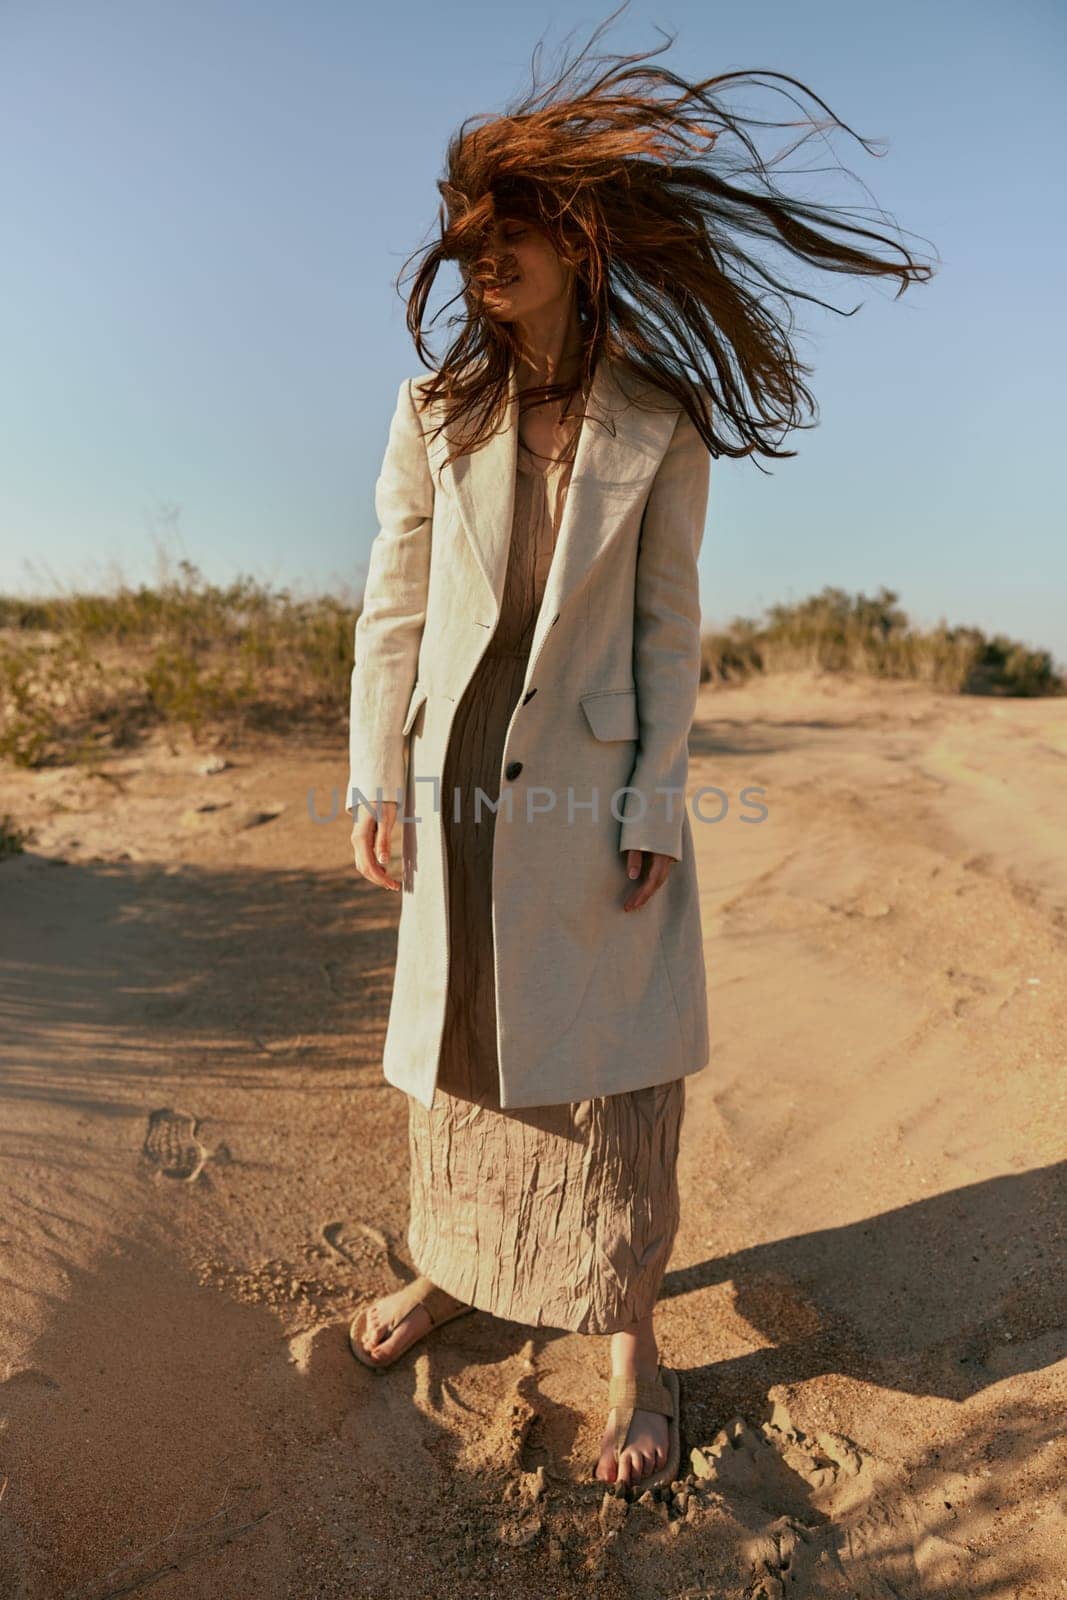 a woman with long red hair blown in the wind stands in stylish clothes on the sand. High quality photo